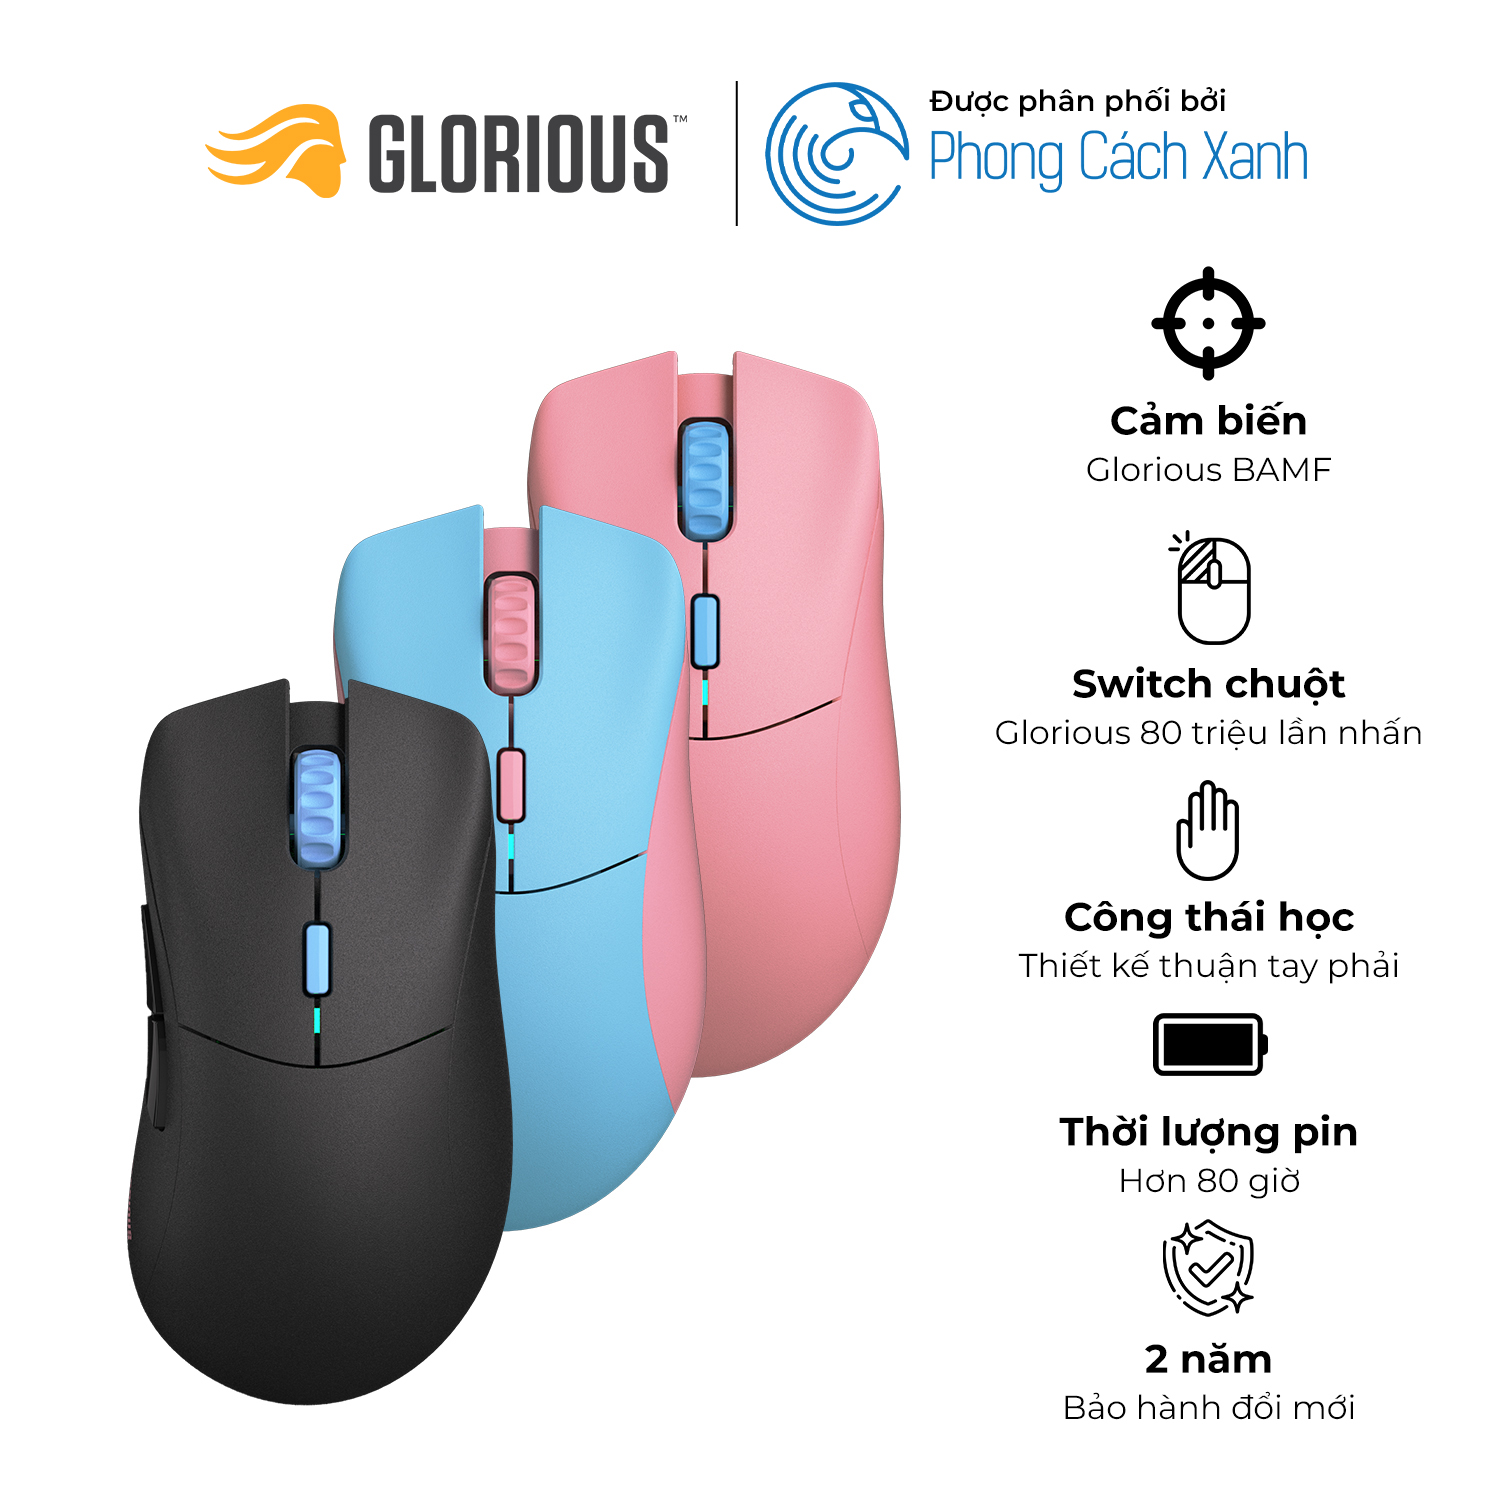 GloriousModel D Pro wireless mouse Forge Limited Edition